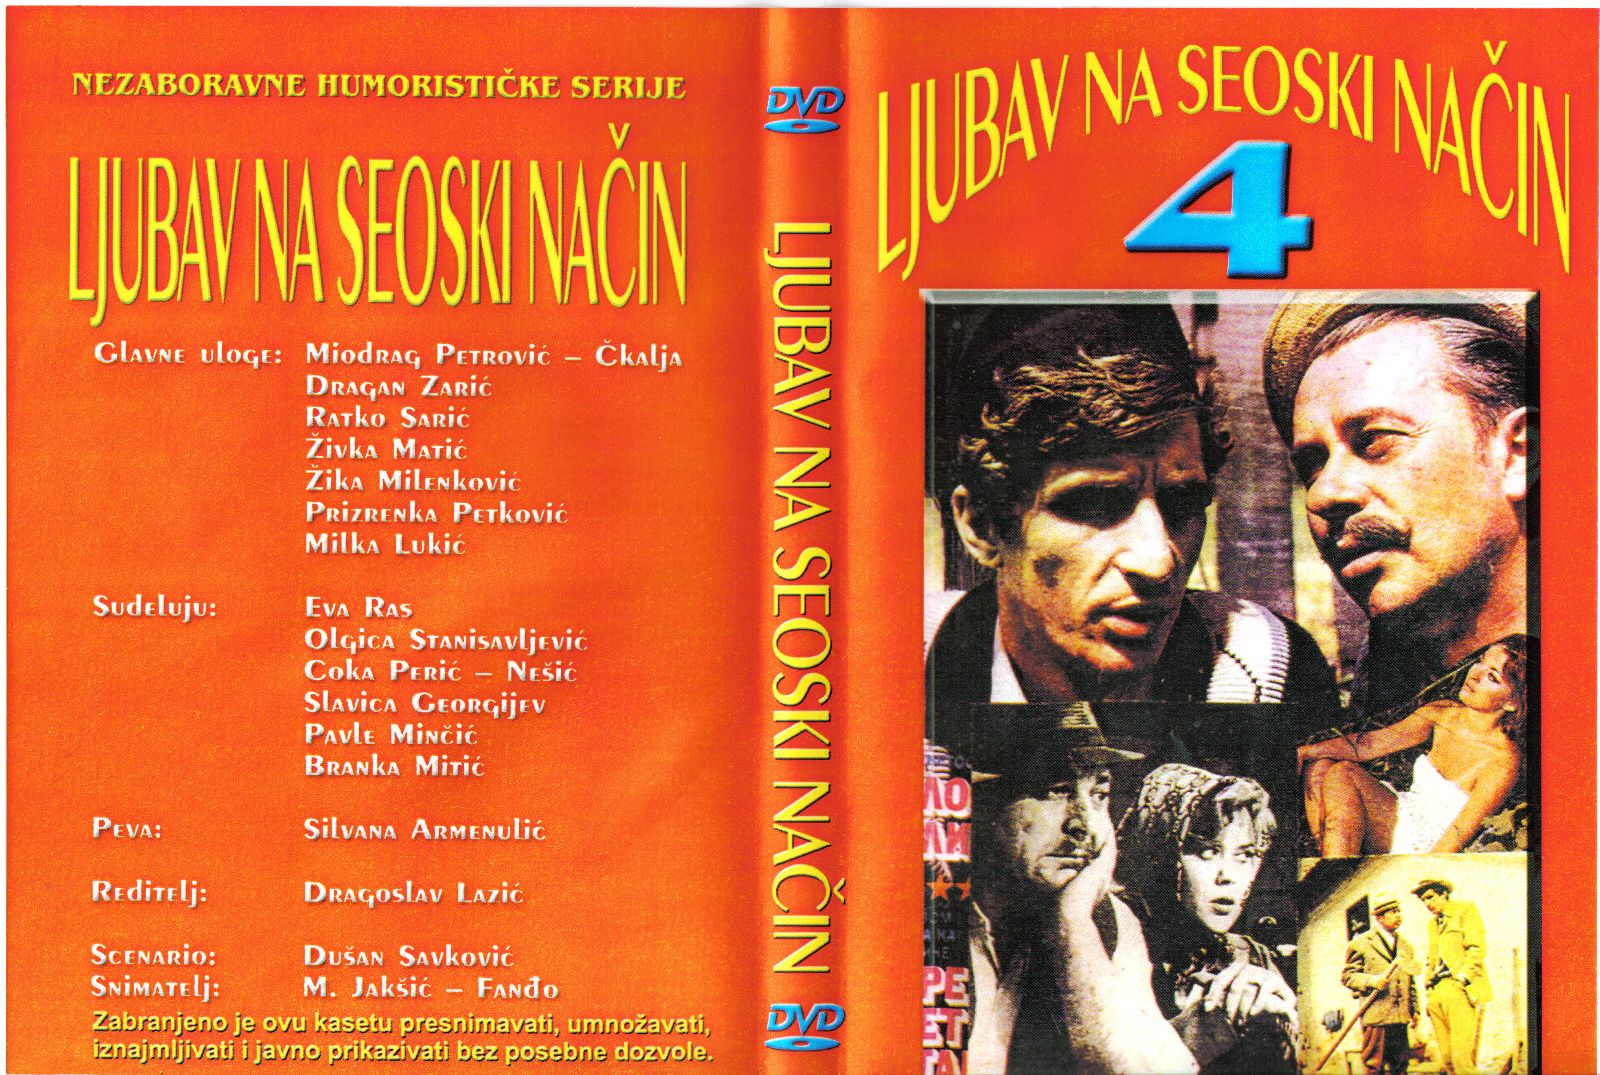 Click to view full size image -  DVD Cover - L - DVD - LJUBAV NA SEOSKI NACIN 4 - DVD - LJUBAV NA SEOSKI NACIN 4.jpg